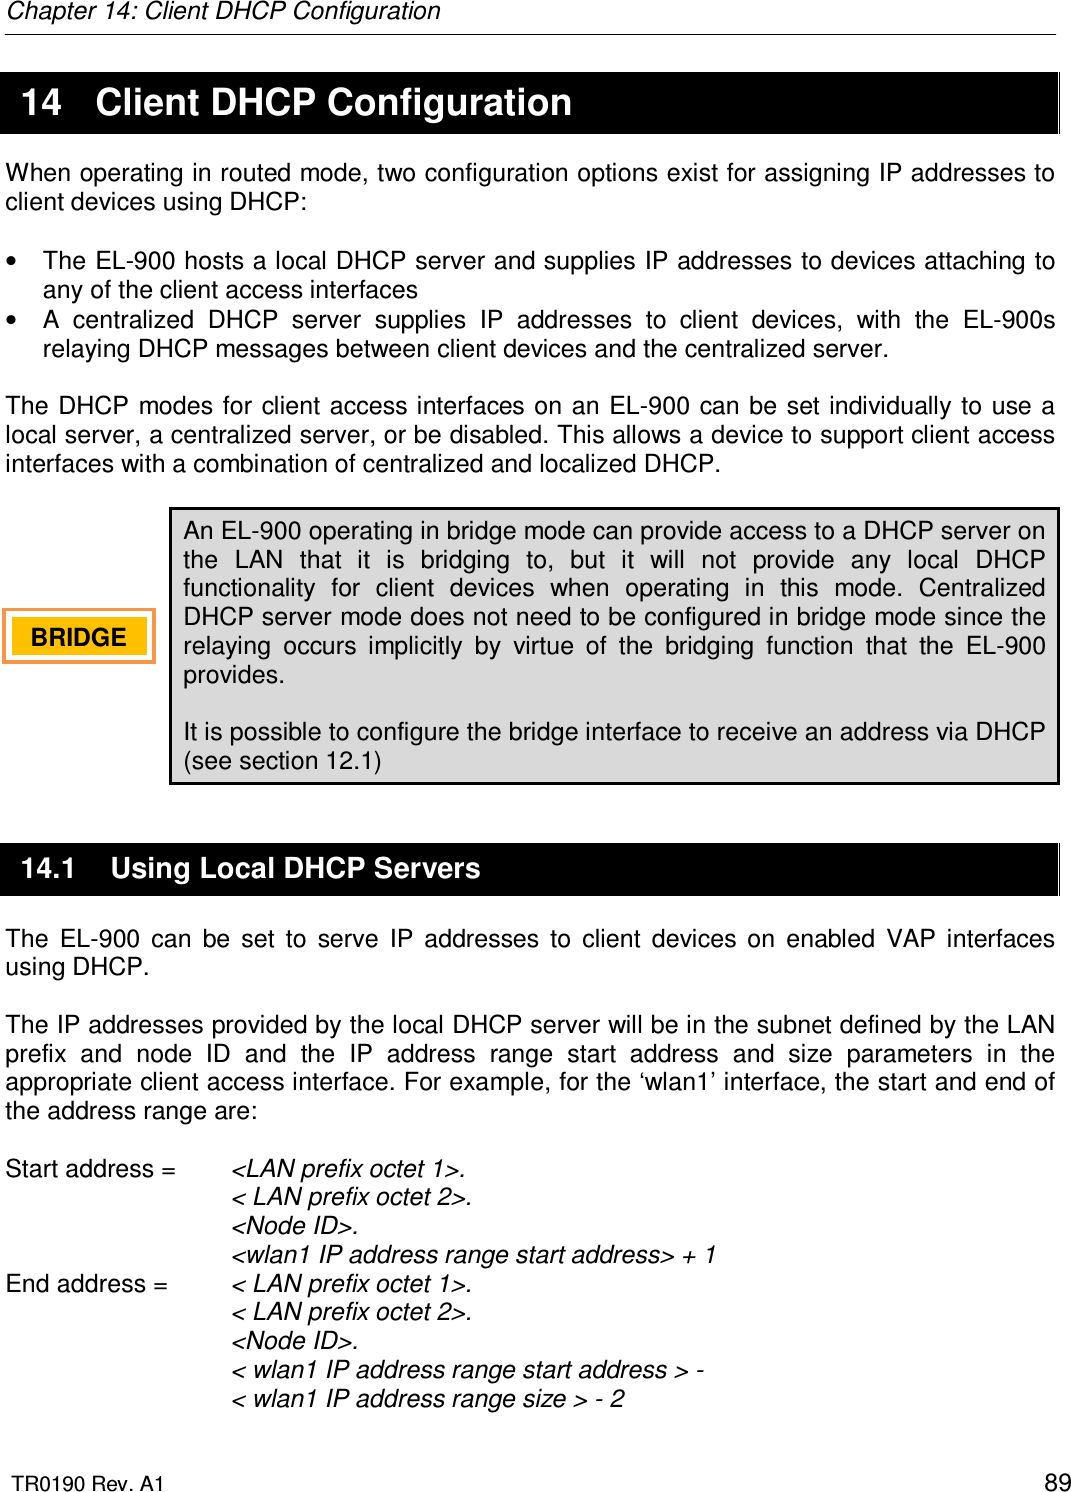 Chapter 14: Client DHCP Configuration  TR0190 Rev. A1    89 14  Client DHCP Configuration When operating in routed mode, two configuration options exist for assigning IP addresses to client devices using DHCP:  •  The EL-900 hosts a local DHCP server and supplies IP addresses to devices attaching to any of the client access interfaces  •  A  centralized  DHCP  server  supplies  IP  addresses  to  client  devices,  with  the  EL-900s relaying DHCP messages between client devices and the centralized server.  The DHCP modes for client access interfaces on an EL-900 can be set individually to use a local server, a centralized server, or be disabled. This allows a device to support client access interfaces with a combination of centralized and localized DHCP.  An EL-900 operating in bridge mode can provide access to a DHCP server on the  LAN  that  it  is  bridging  to,  but  it  will  not  provide  any  local  DHCP functionality  for  client  devices  when  operating  in  this  mode.  Centralized DHCP server mode does not need to be configured in bridge mode since the relaying  occurs  implicitly  by  virtue  of  the  bridging  function  that  the  EL-900 provides.  It is possible to configure the bridge interface to receive an address via DHCP (see section 12.1) 14.1  Using Local DHCP Servers The  EL-900  can  be  set  to  serve  IP  addresses  to  client  devices  on  enabled  VAP  interfaces using DHCP.   The IP addresses provided by the local DHCP server will be in the subnet defined by the LAN prefix  and  node  ID  and  the  IP  address  range  start  address  and  size  parameters  in  the appropriate client access interface. For example, for the ‘wlan1’ interface, the start and end of the address range are:  Start address =   &lt;LAN prefix octet 1&gt;. &lt; LAN prefix octet 2&gt;. &lt;Node ID&gt;. &lt;wlan1 IP address range start address&gt; + 1 End address =   &lt; LAN prefix octet 1&gt;. &lt; LAN prefix octet 2&gt;. &lt;Node ID&gt;. &lt; wlan1 IP address range start address &gt; -  &lt; wlan1 IP address range size &gt; - 2 BRIDGE   